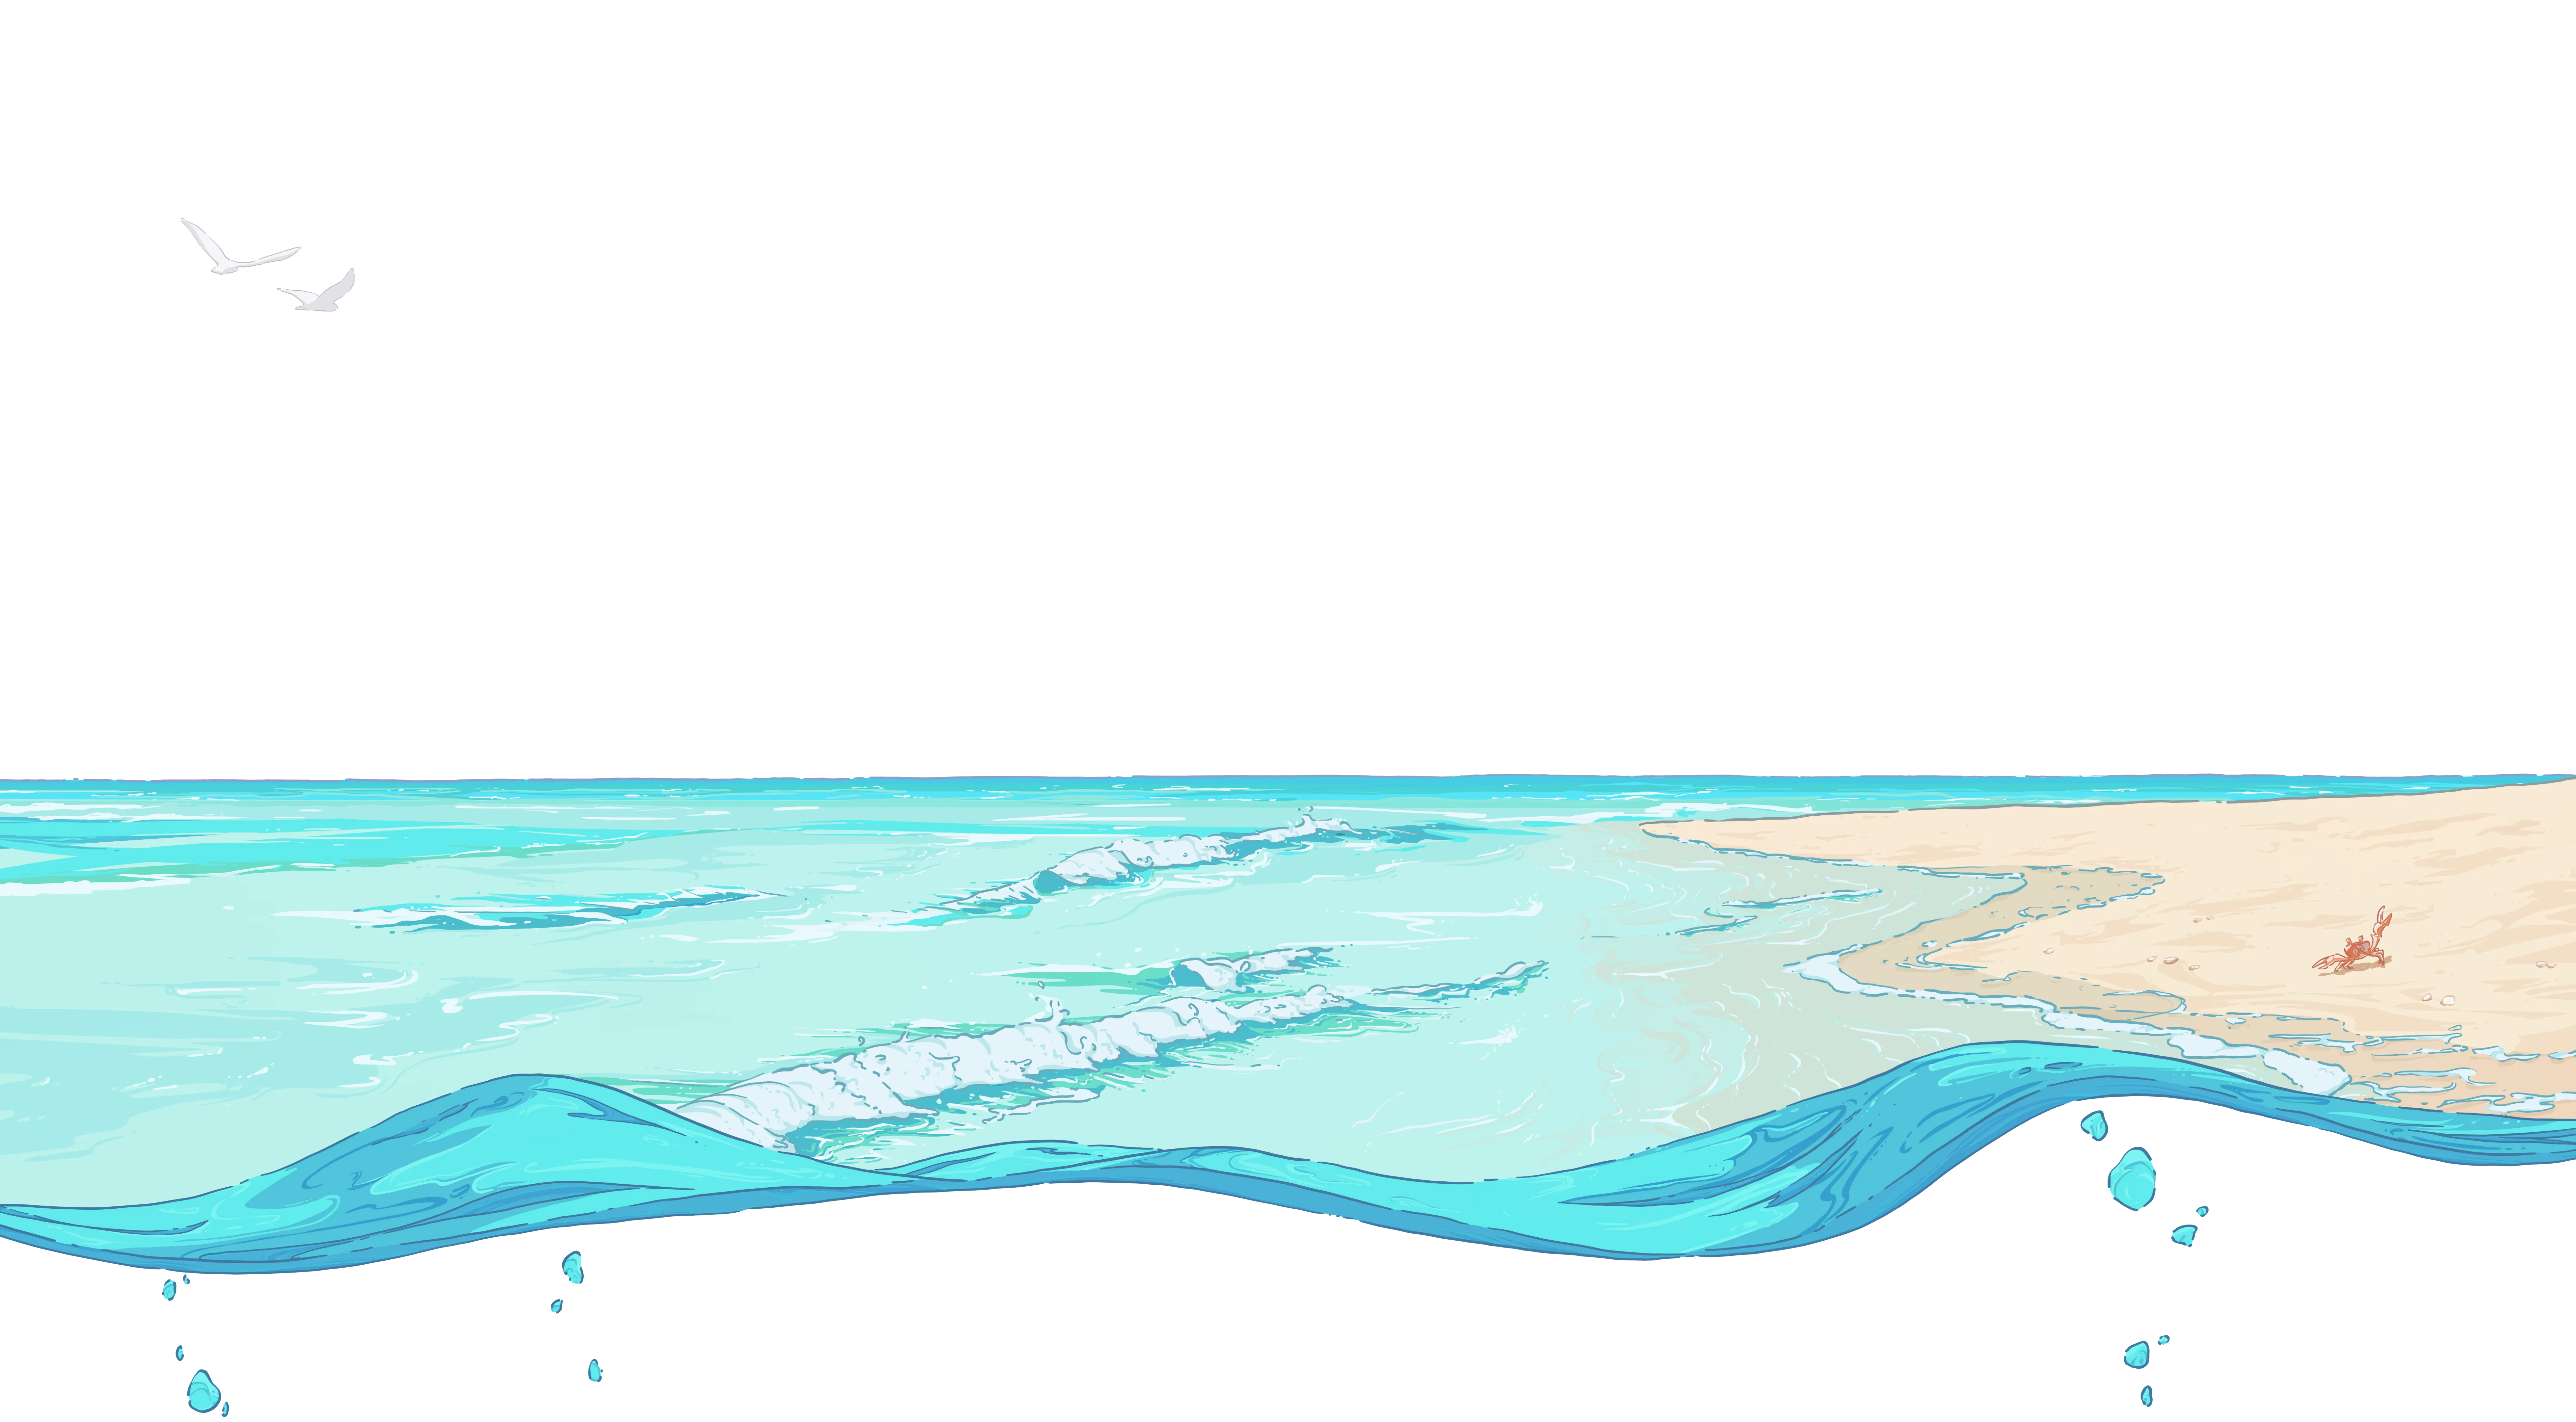 page divider illustration of the ocean waves and a crab waving at you on the sandy beach